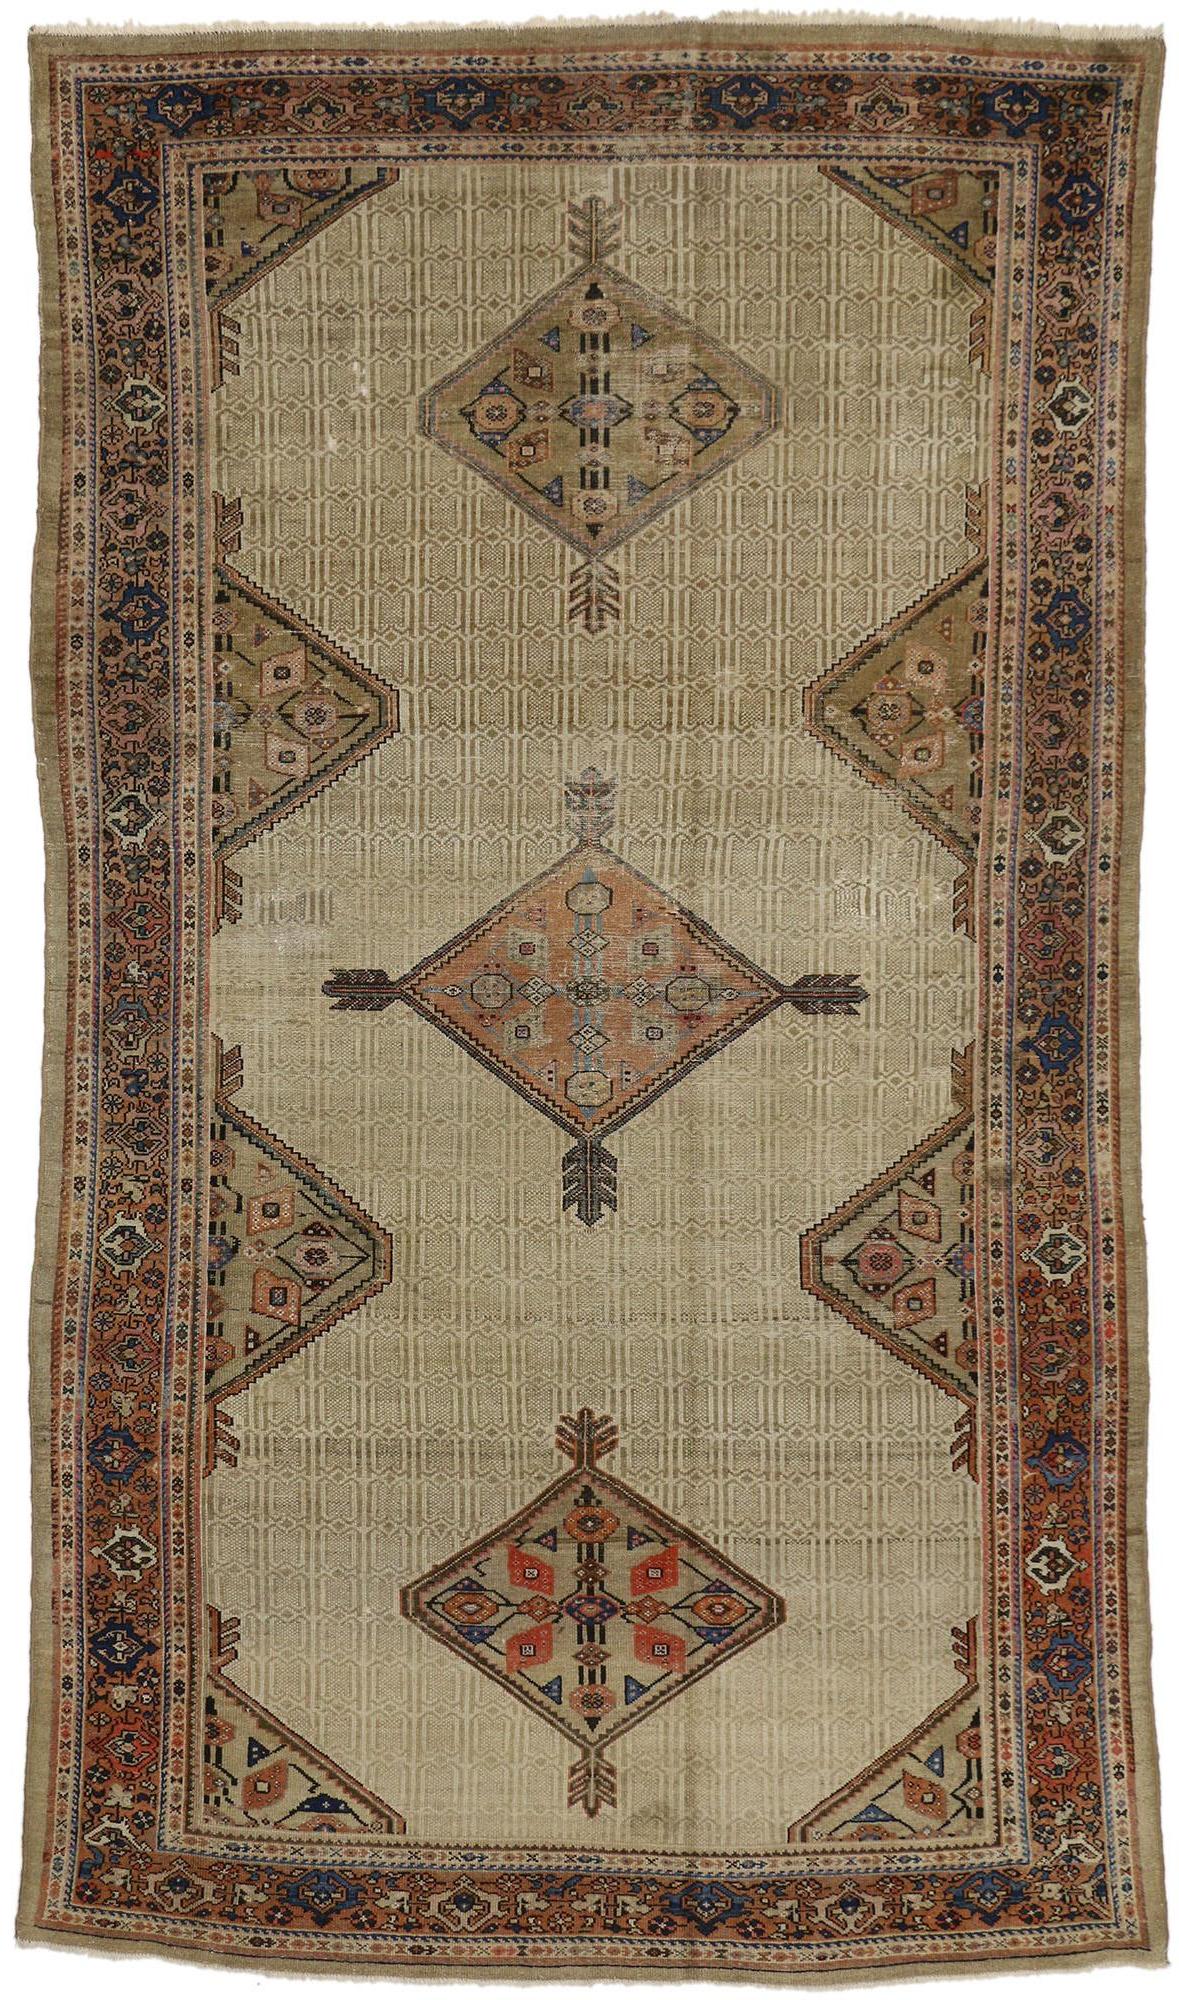 74246 Distressed Antique Persian Malayer Gallery Rug with Modern Industrial Style 06'06 x 11'08.​ This hand-knotted wool distressed antique Persian Malayer gallery rug features three lozenge style amulet medallions floating in a repeating geometric